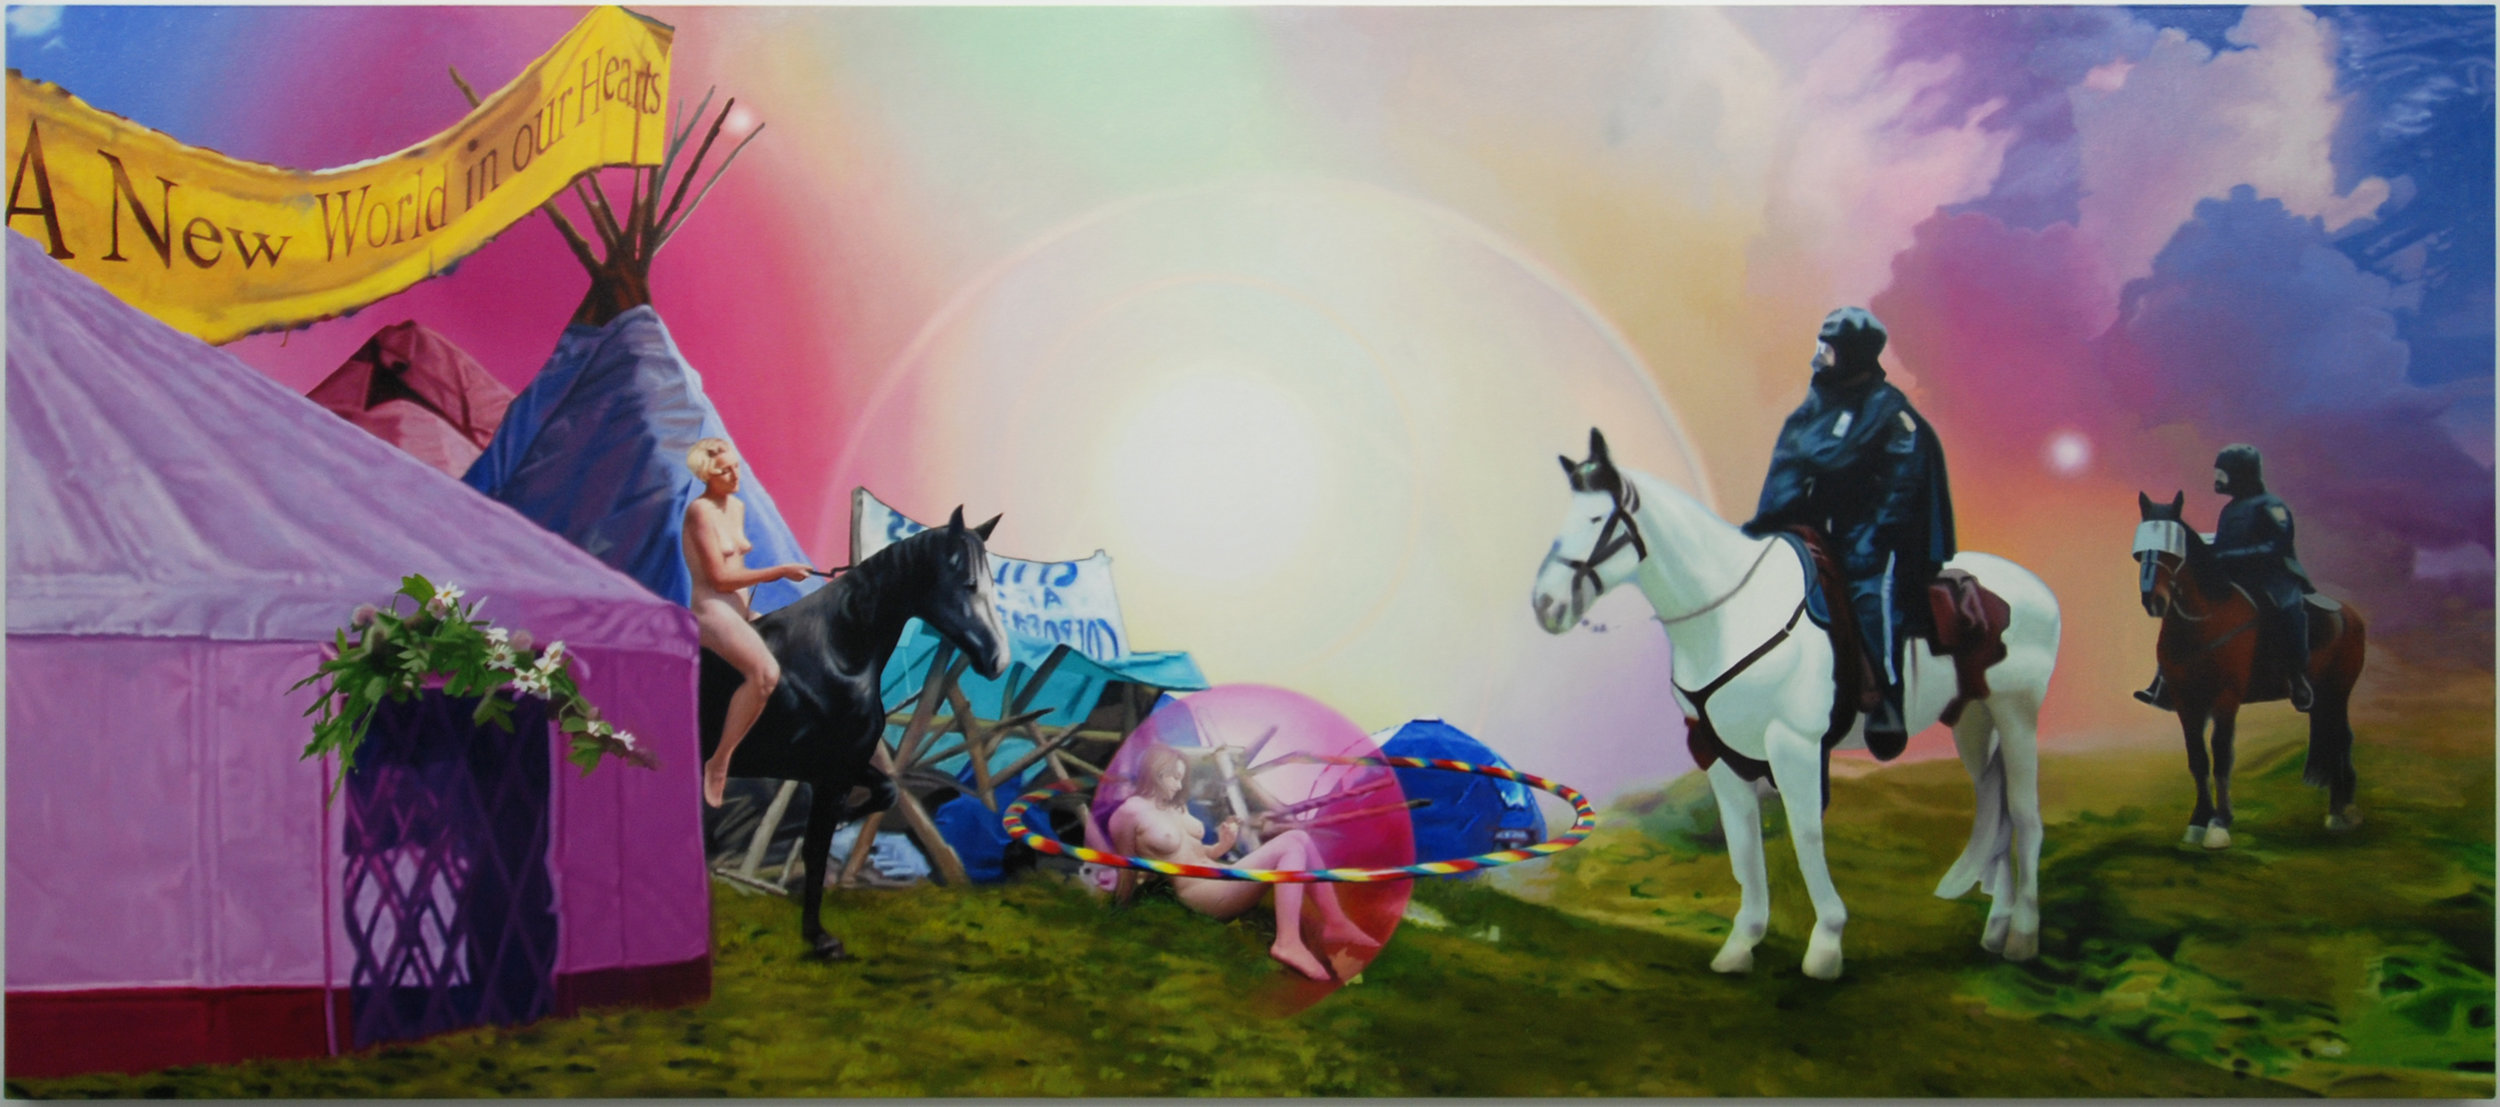 Nomads Face a Grave Danger from Invading Forces, oil on canvas, 63" X 144" 2005